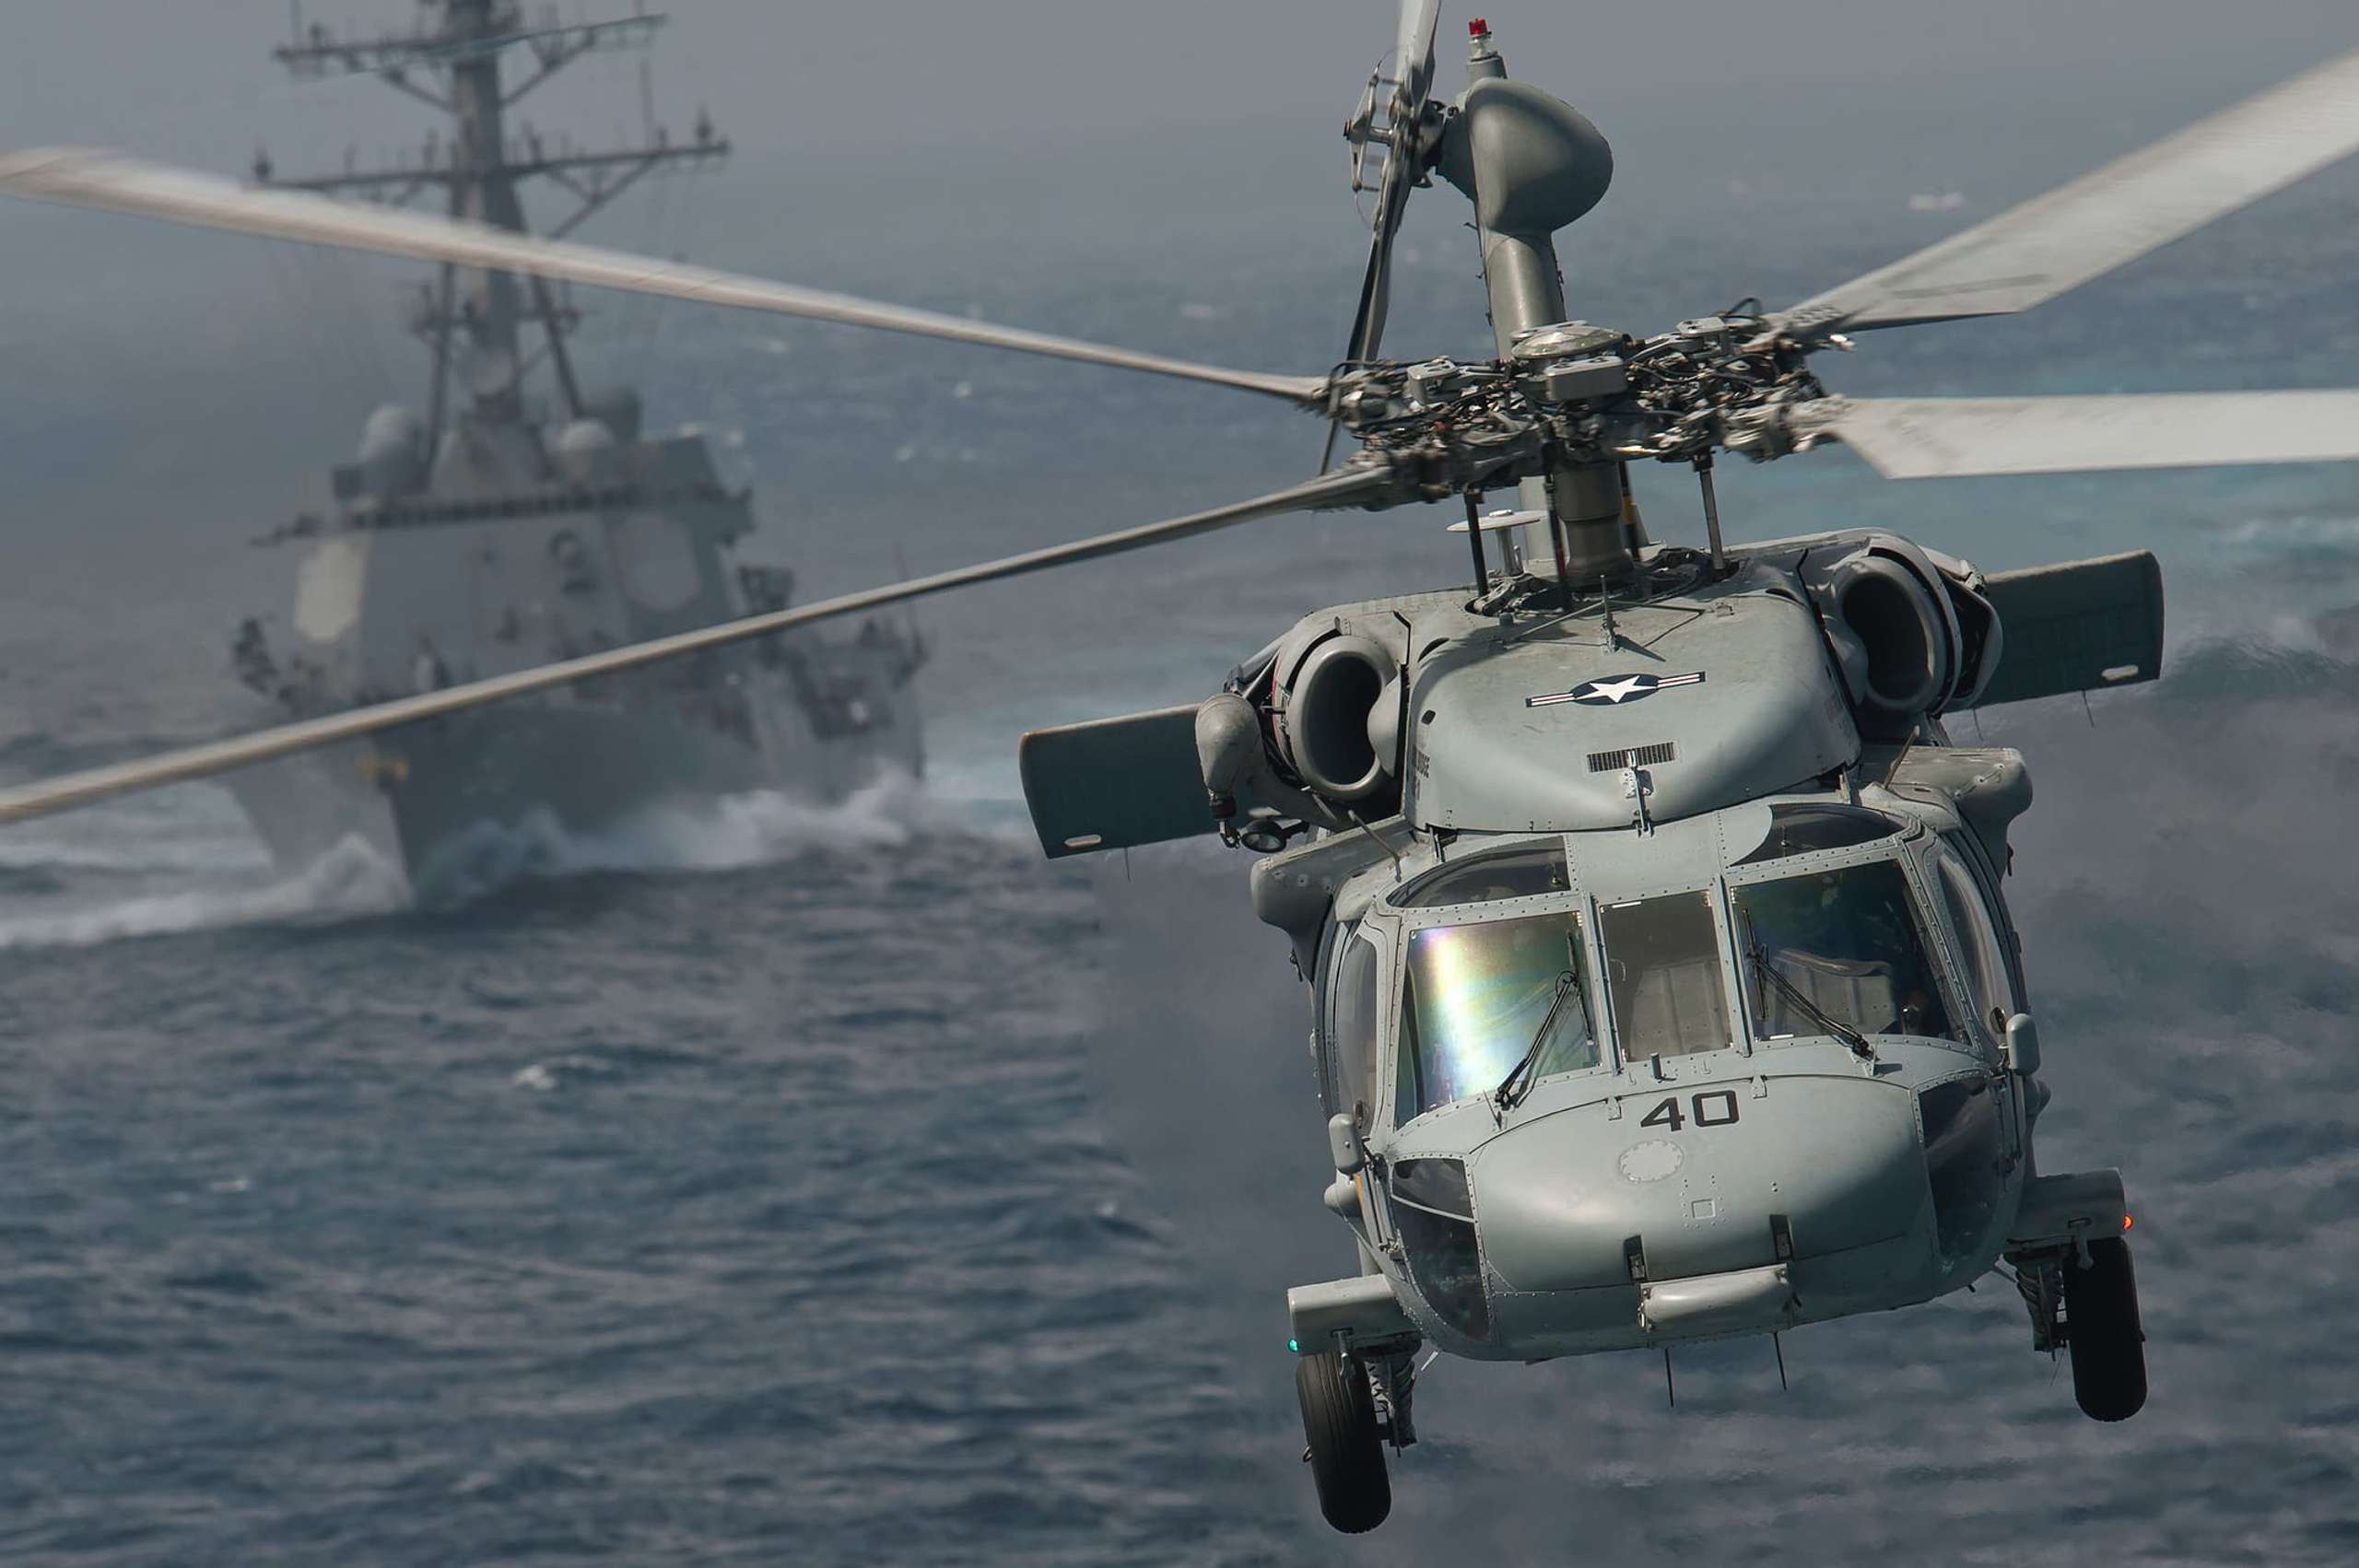 Helicopter flying towards camera with war ship in background